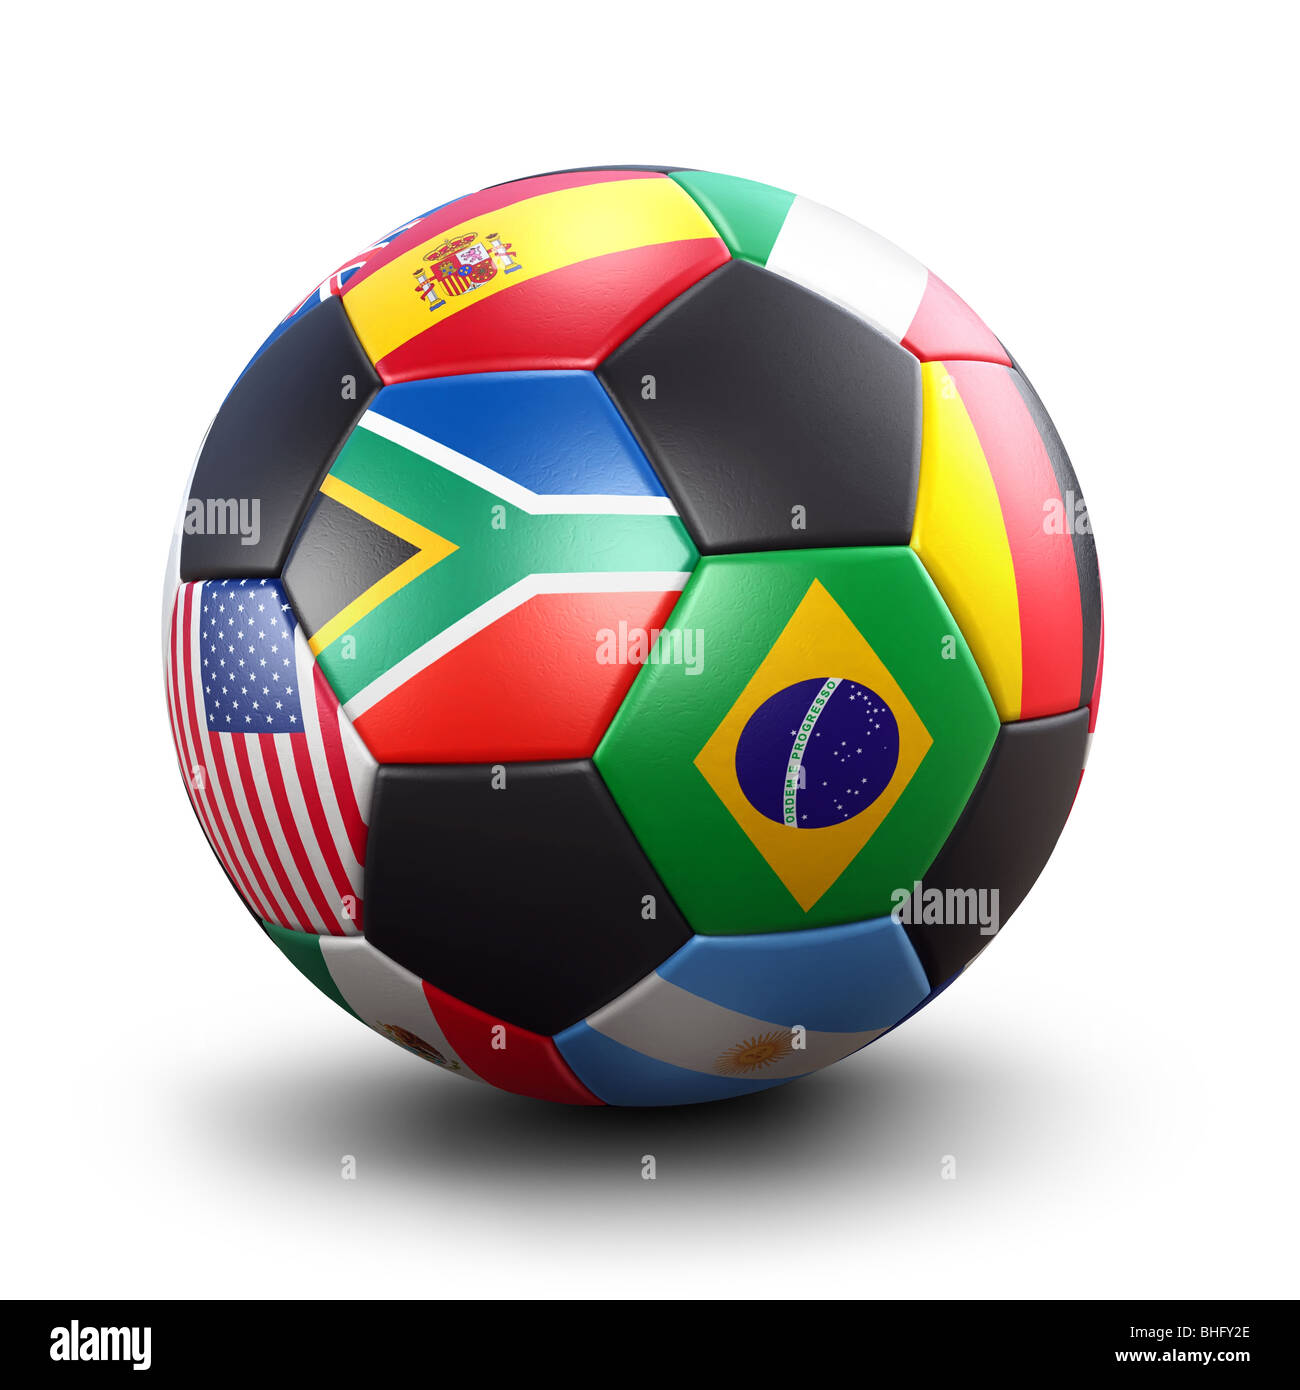 2010 FIFA World Cup South Africa ball (3d illustration Stock Photo - Alamy